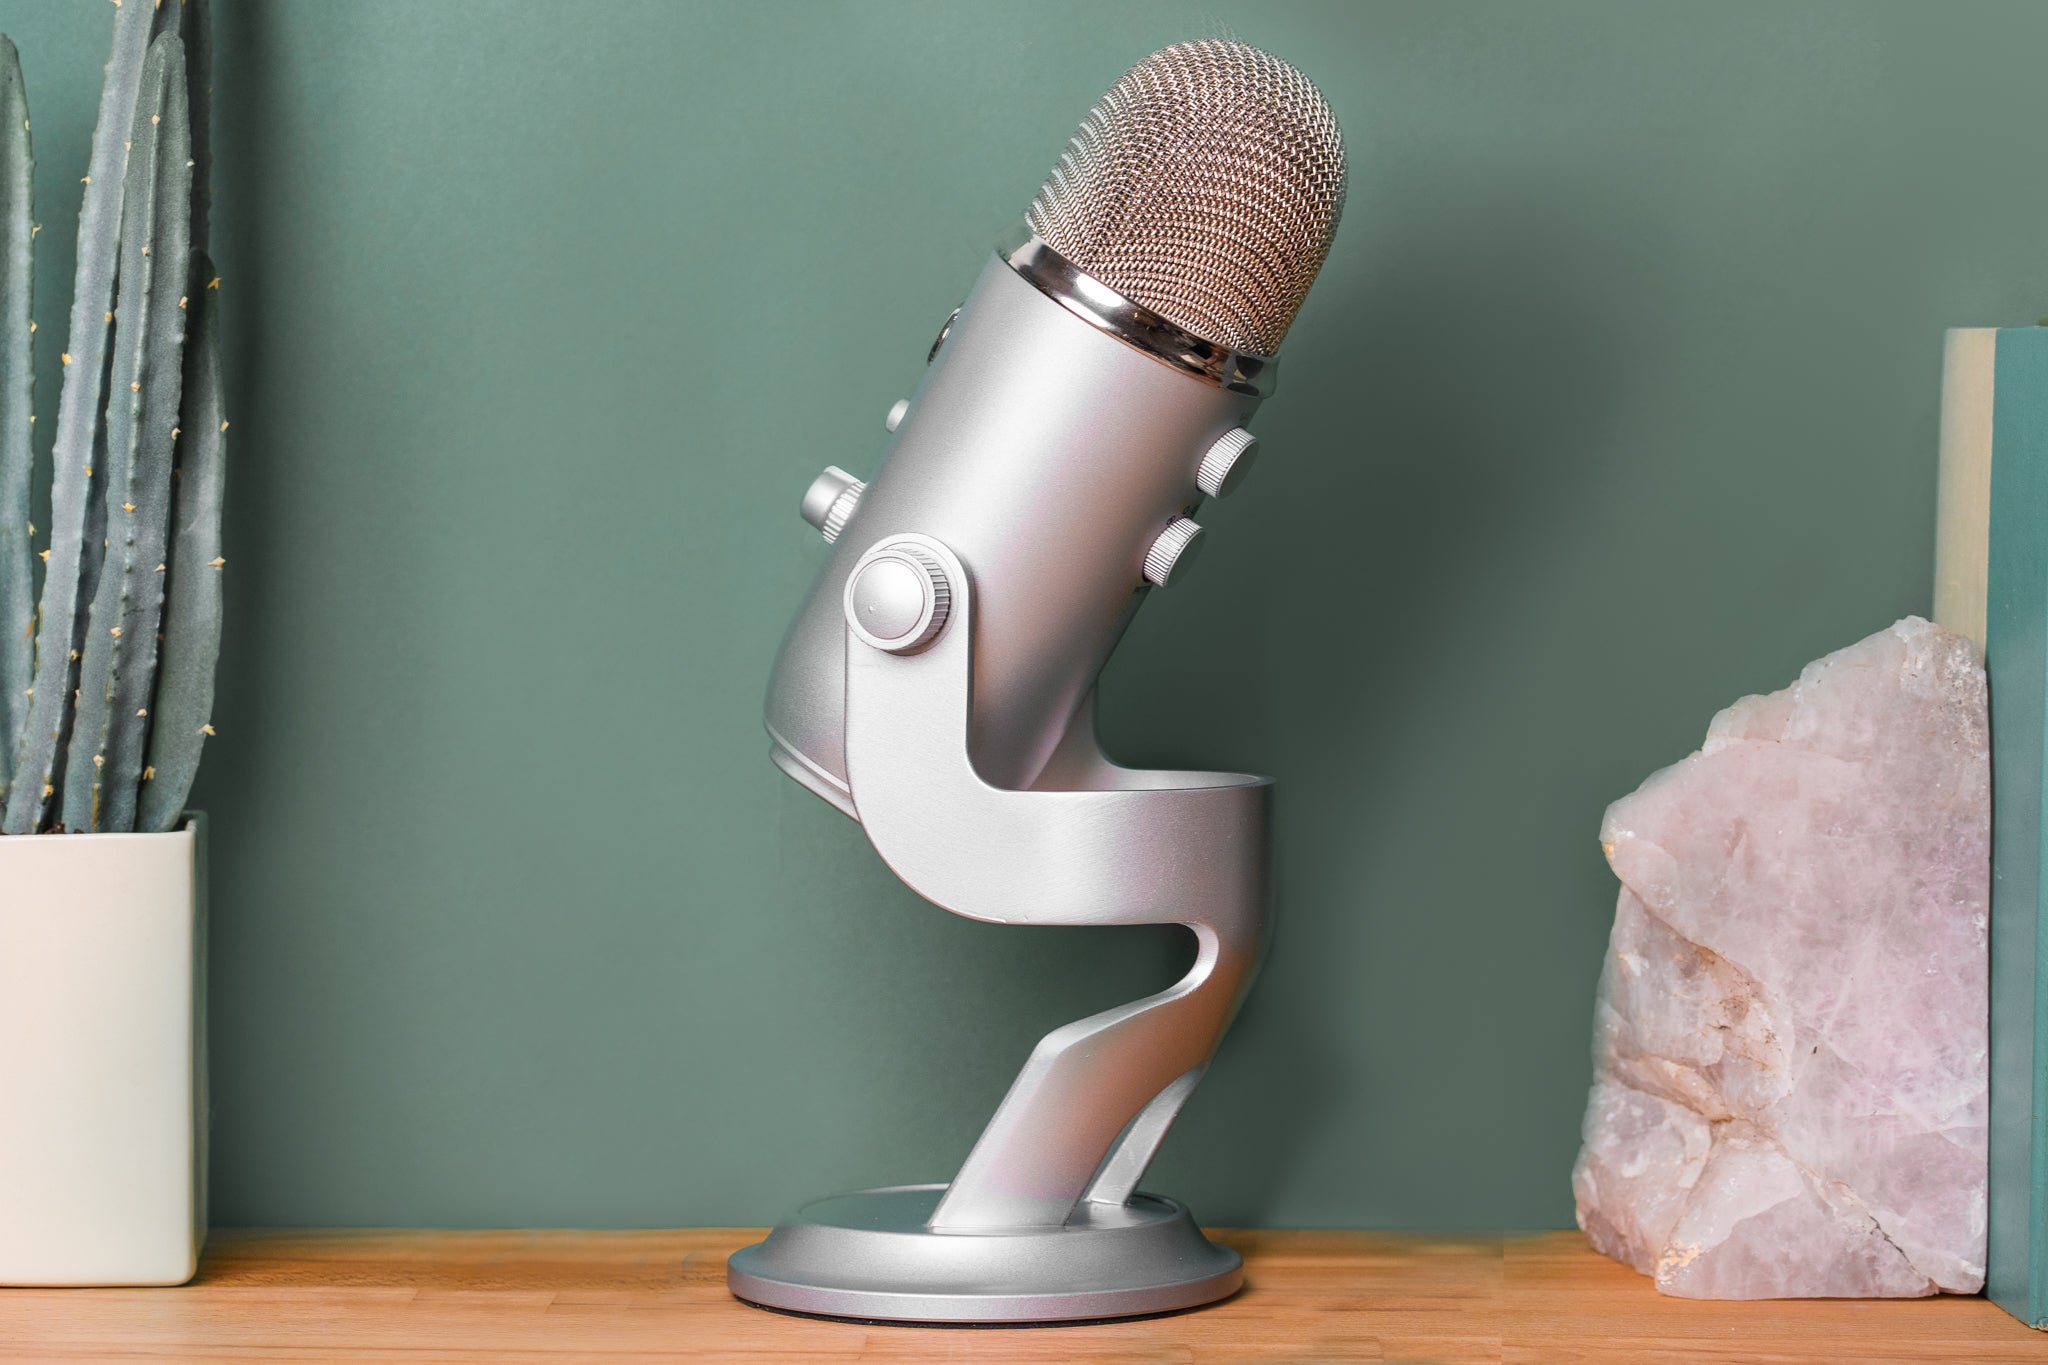 How To Add Enhancements To A USB Microphone